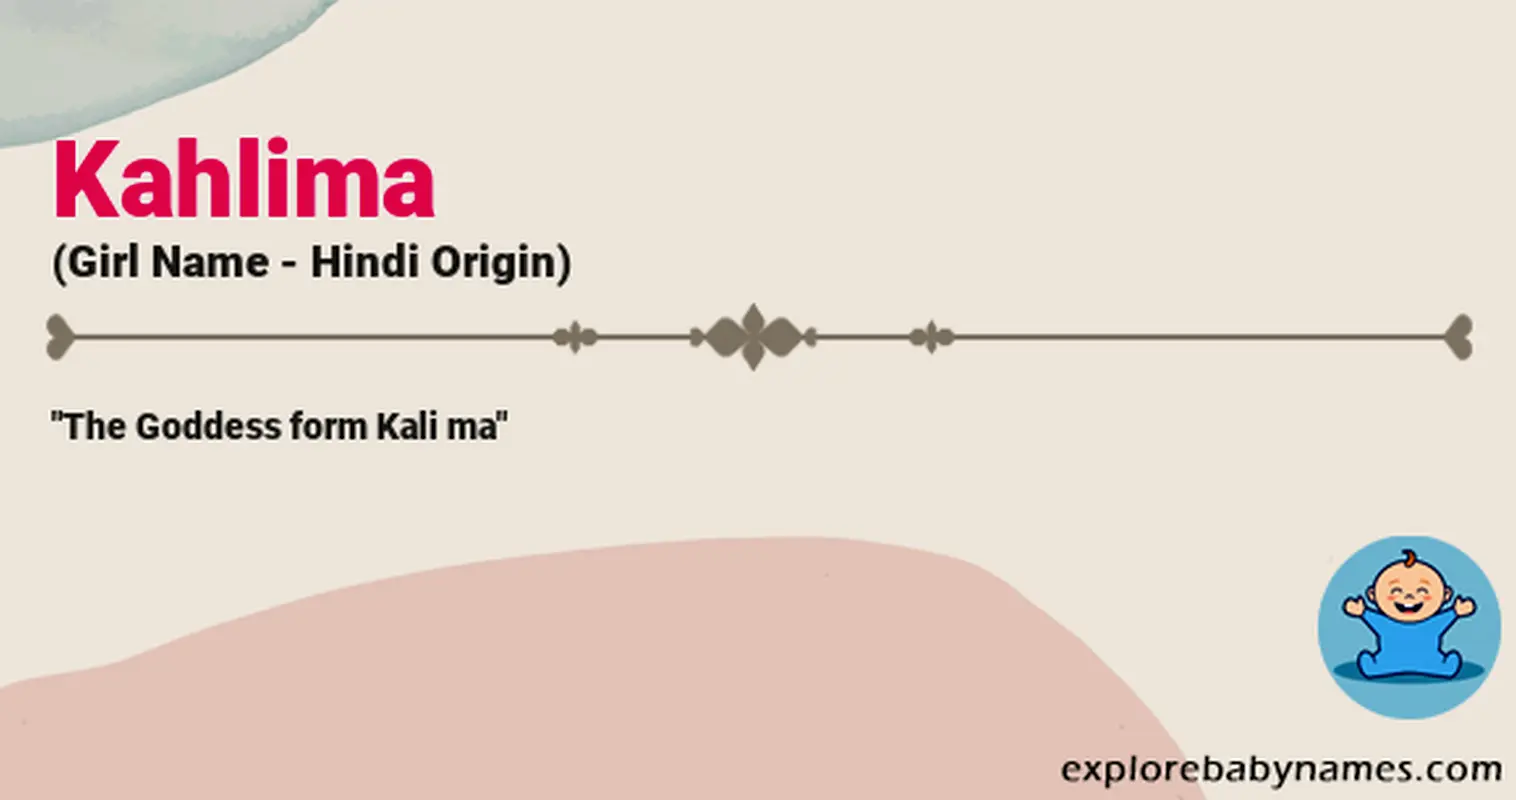 Meaning of Kahlima